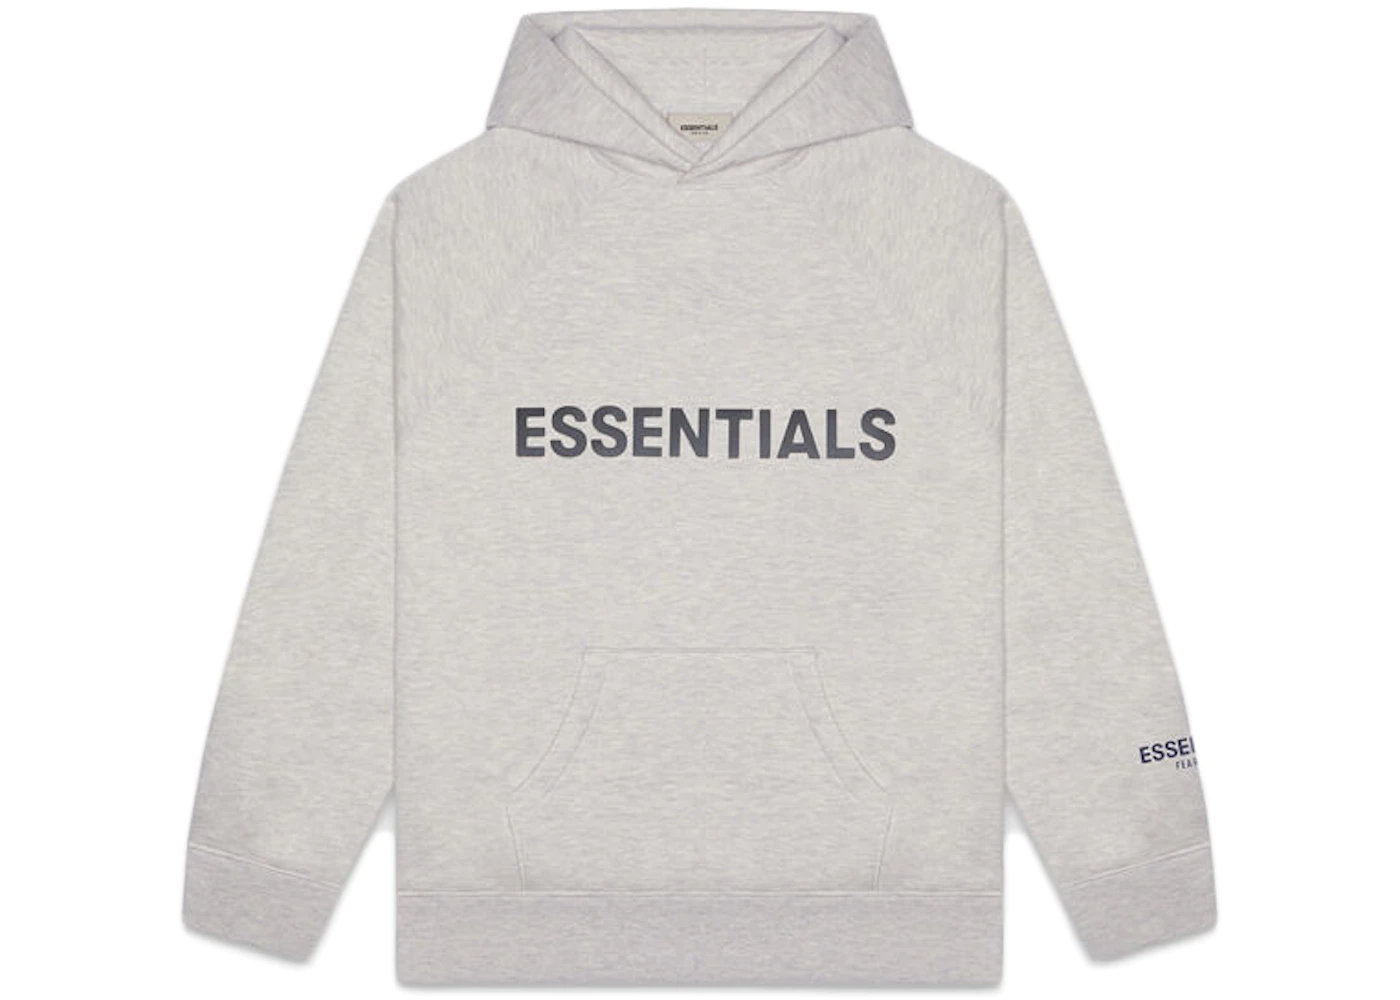 FEAR OF GOD ESSENTIALS 3D Silicon Applique Pullover Hoodie Heather Oatmeal